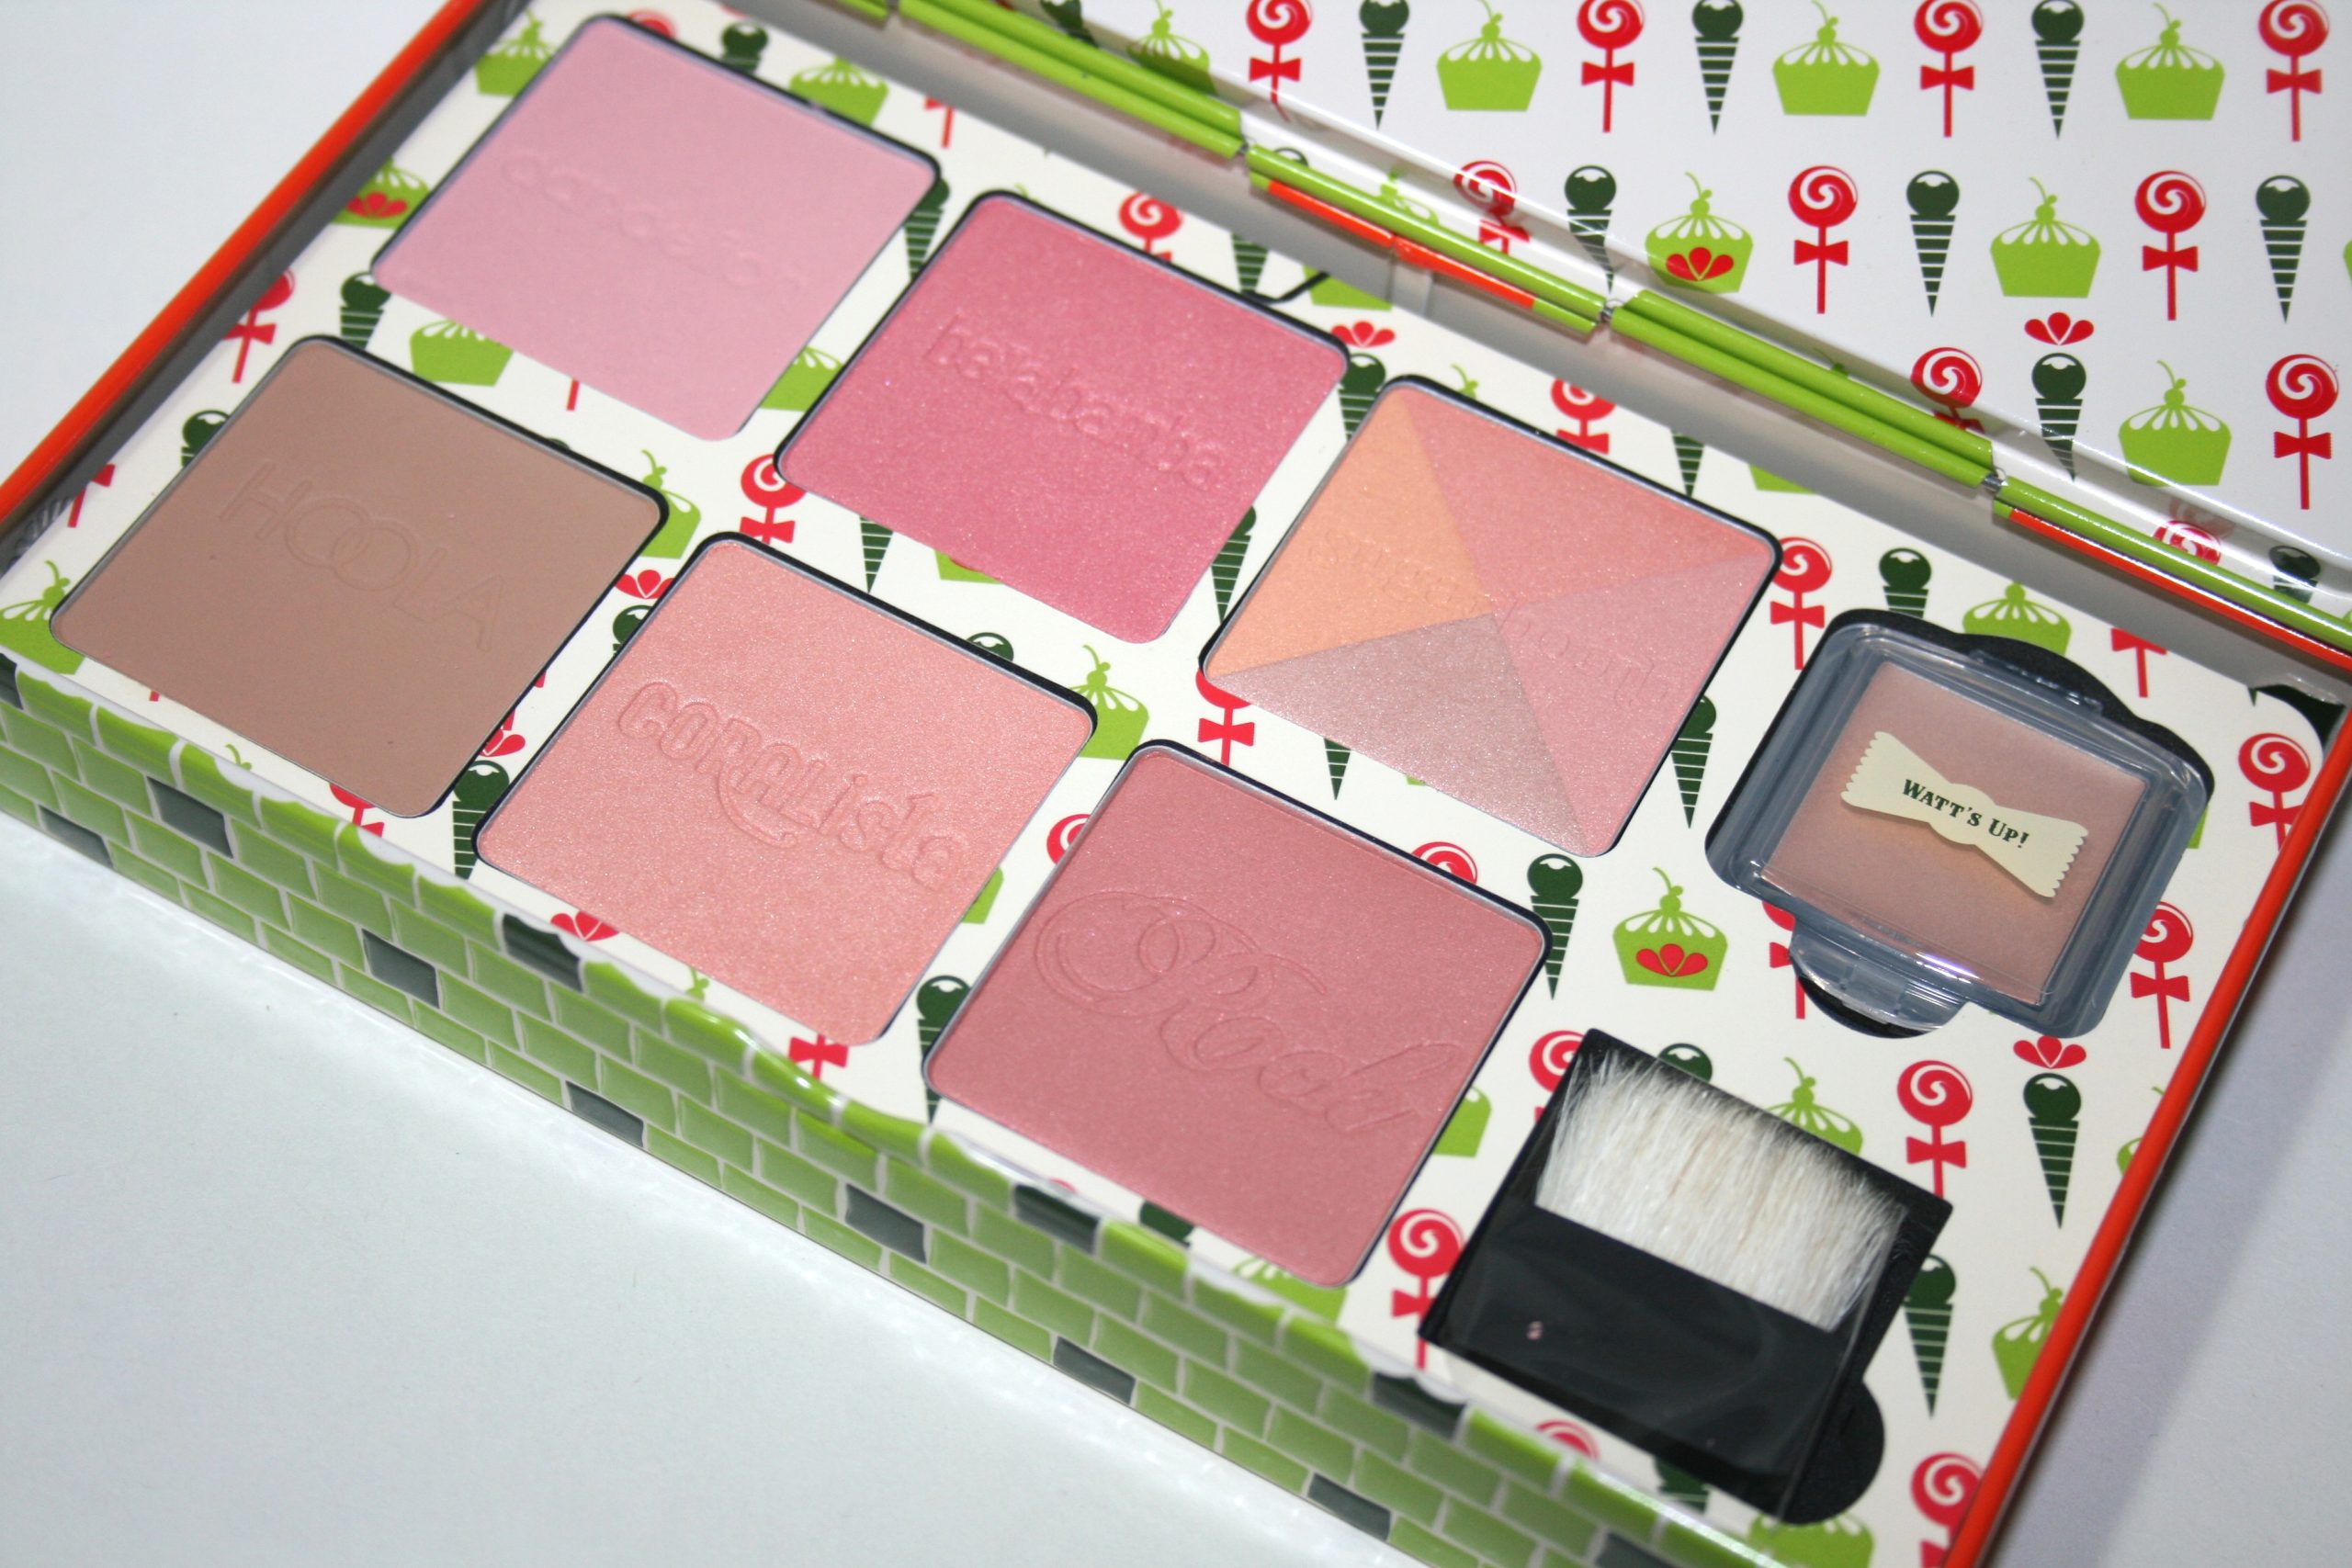 12 Gifts of Christmas 2014: Benefit Cheeky Sweet Spot